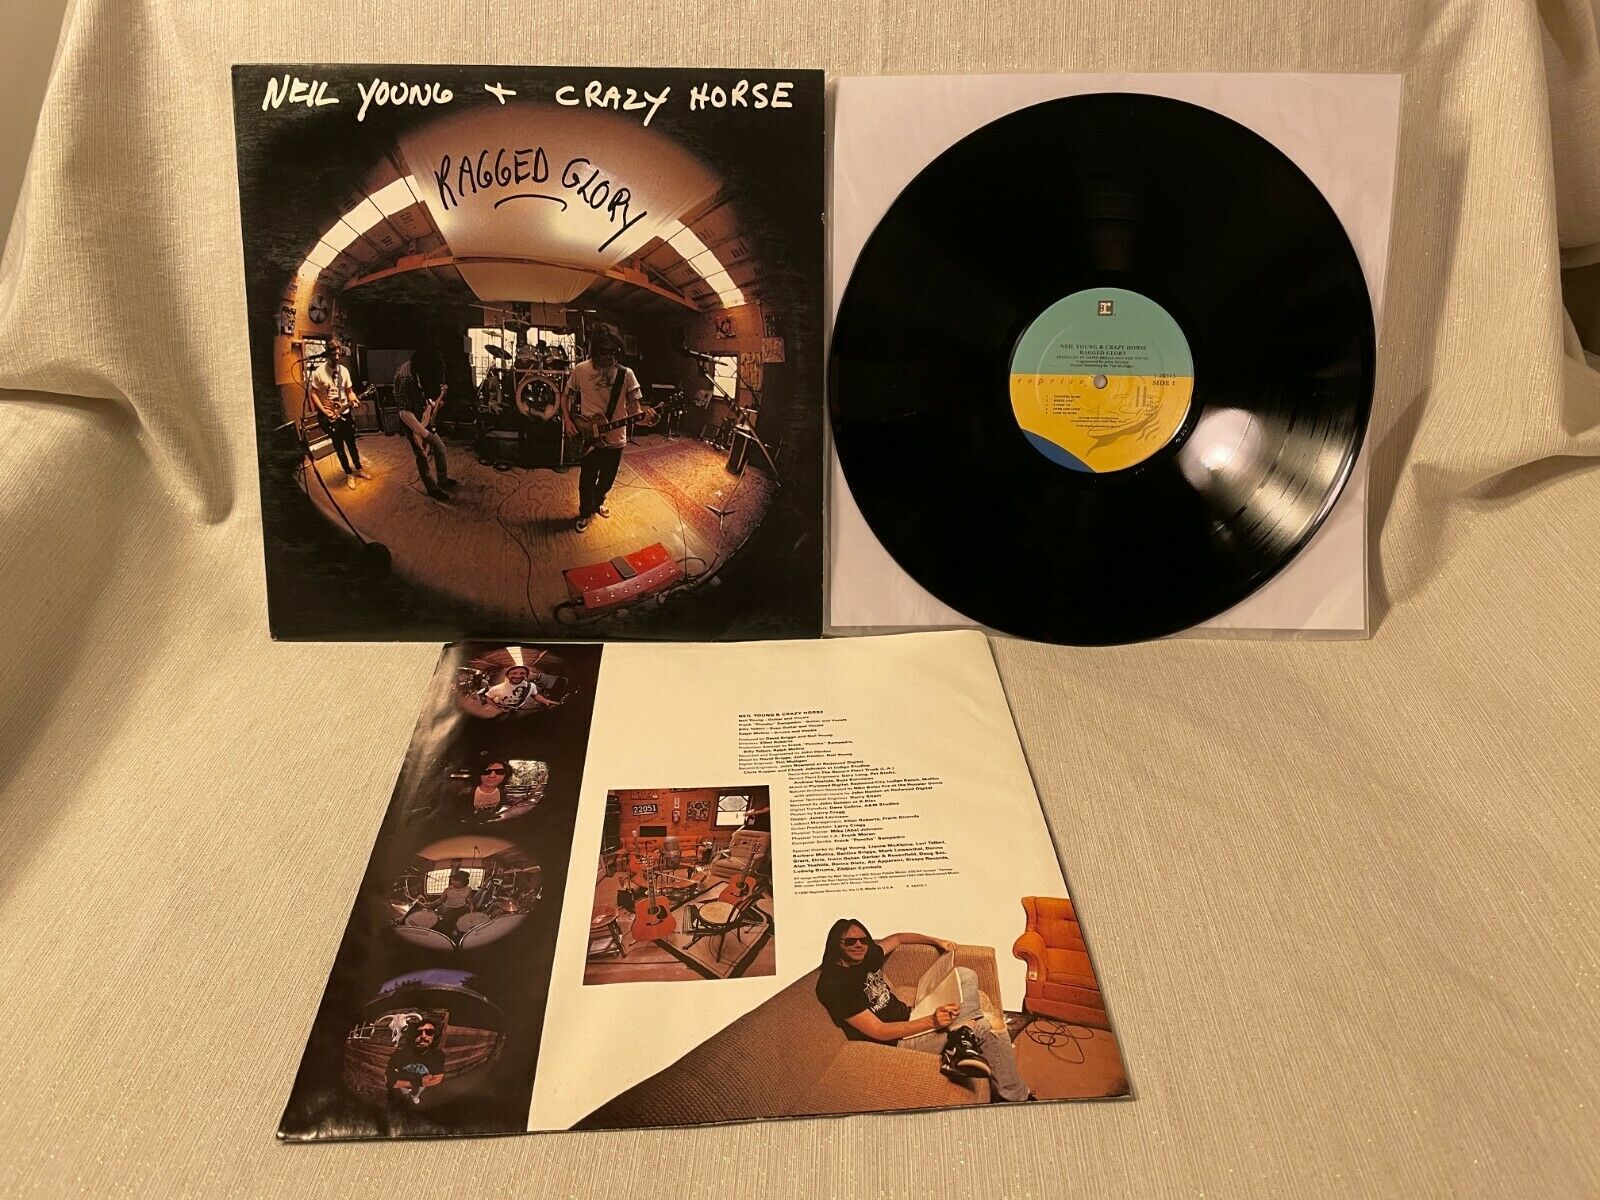 Primary image for 1990 Neil Young & Crazy Horse Ragged Glory LP Reprise Records 9 26315-1 VG+/VG